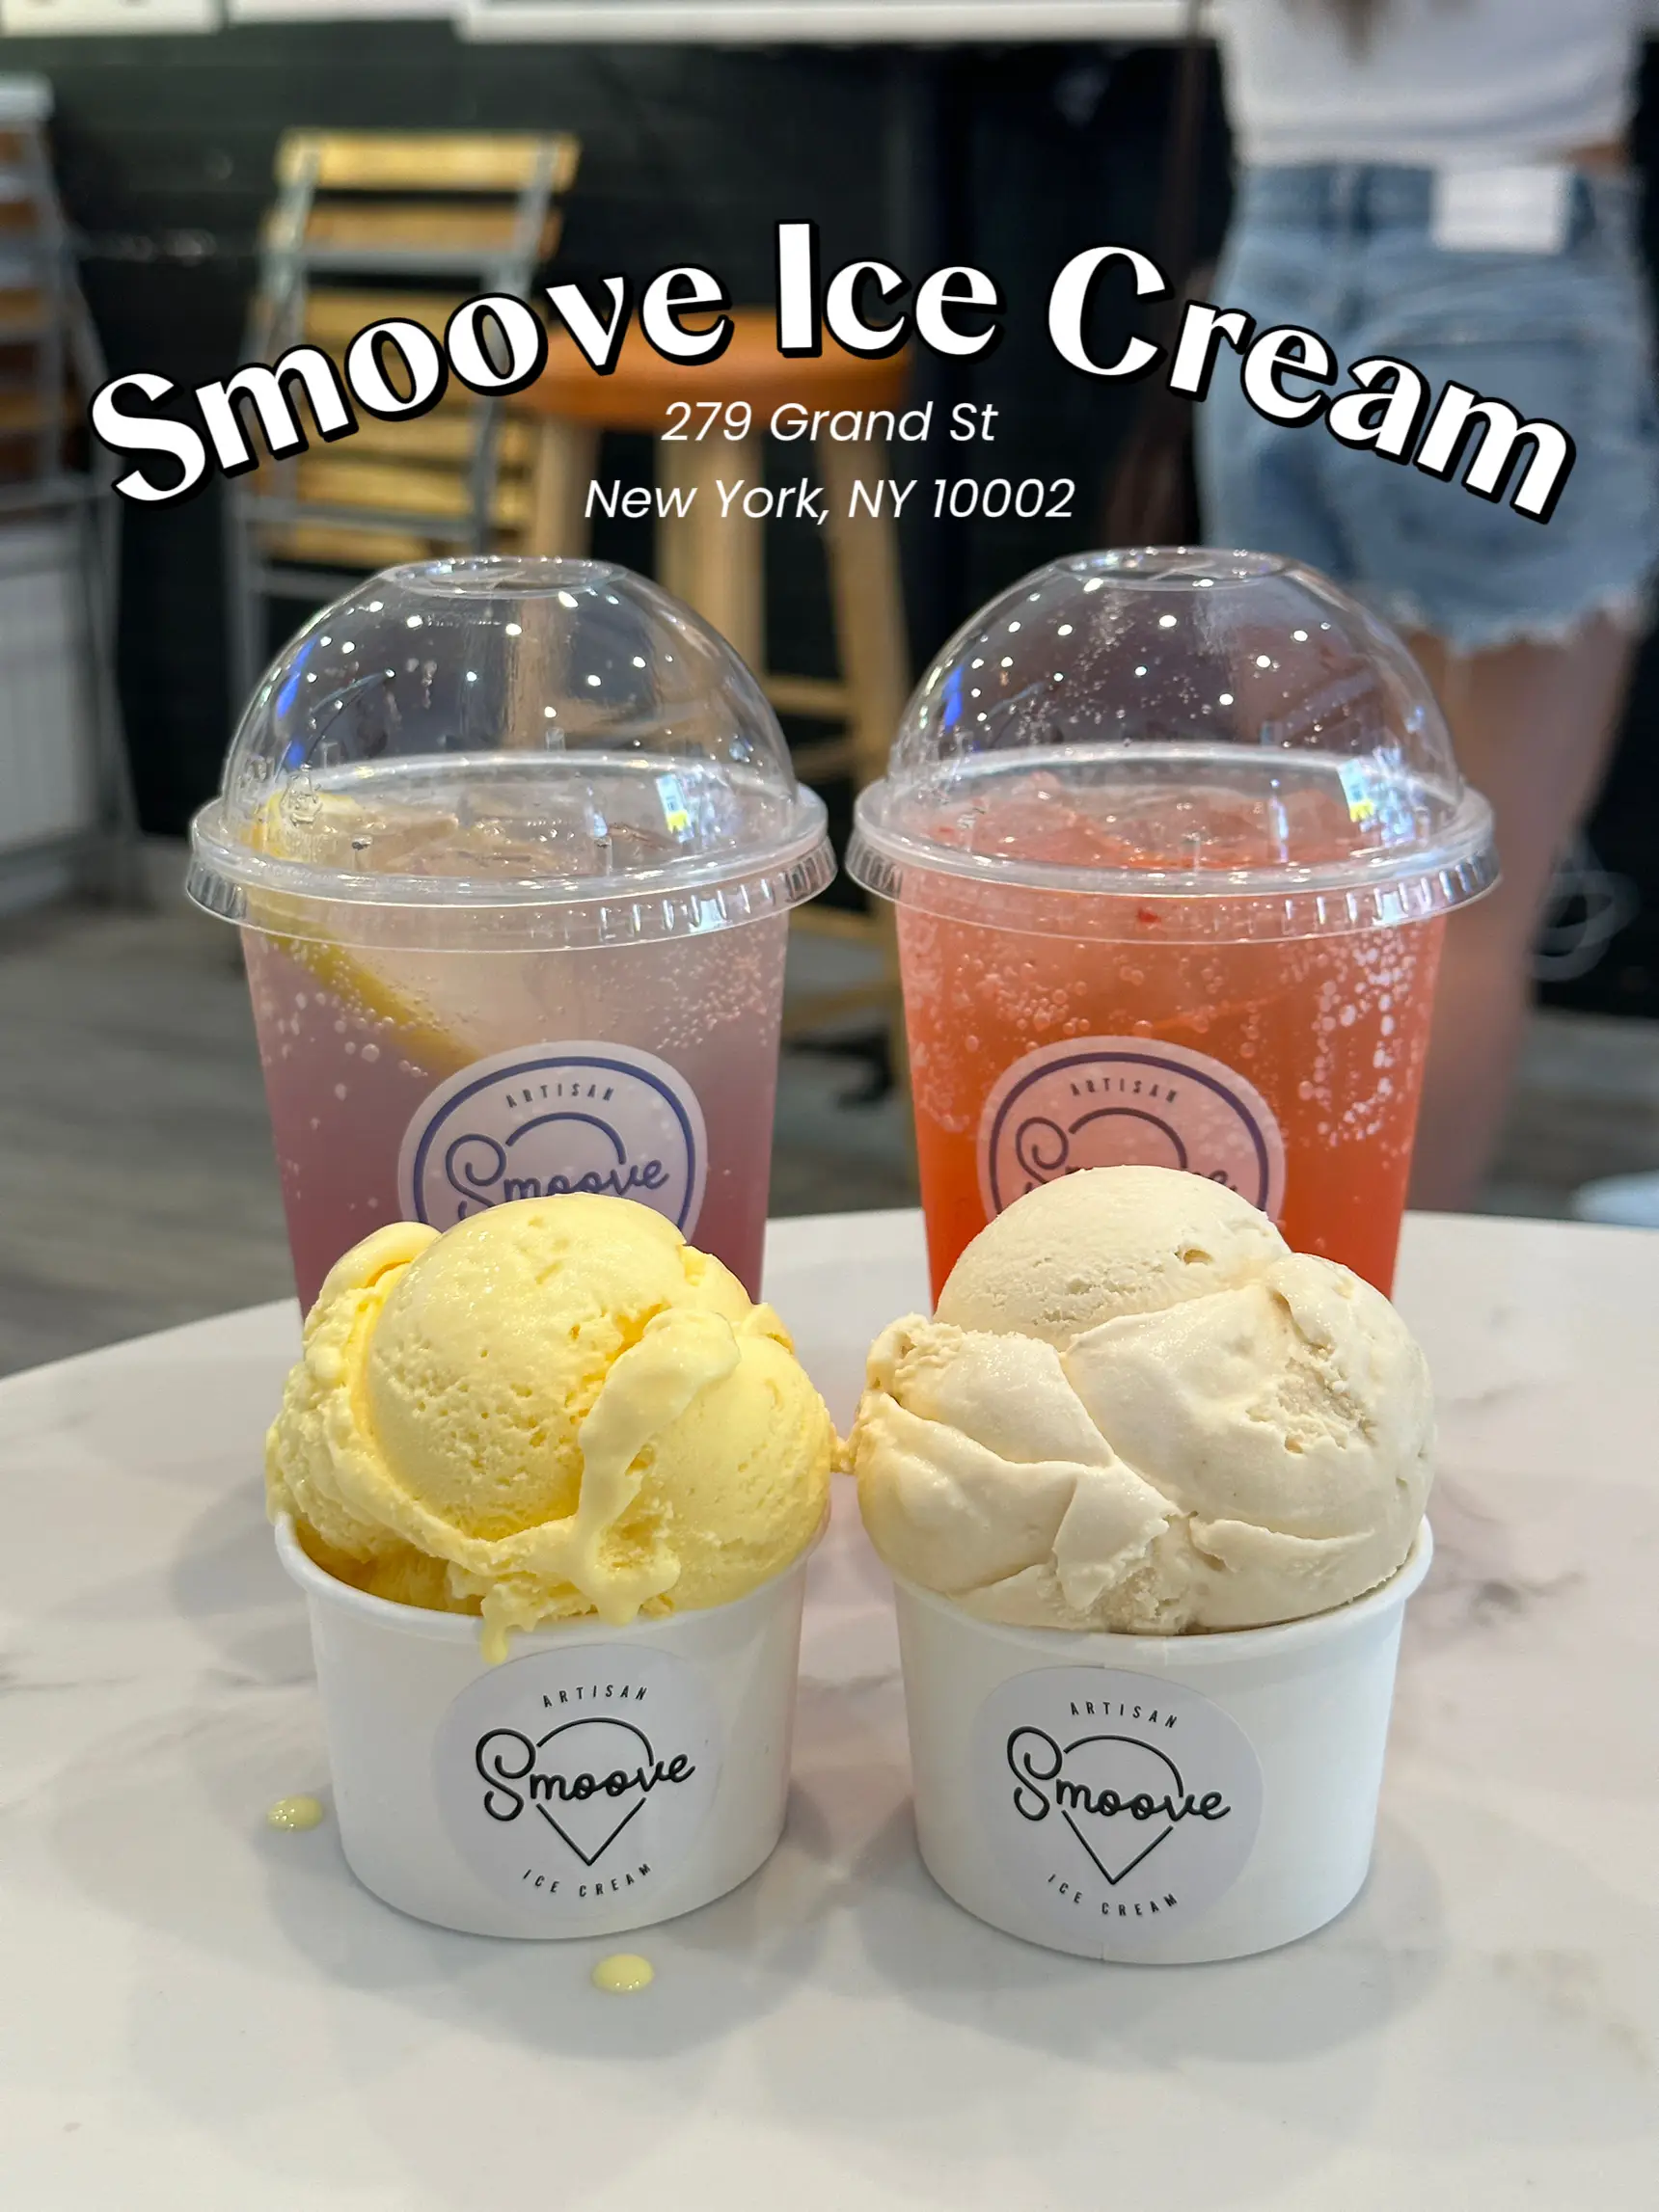 Smoove Ice Cream, Gallery posted by Sharon 🌸